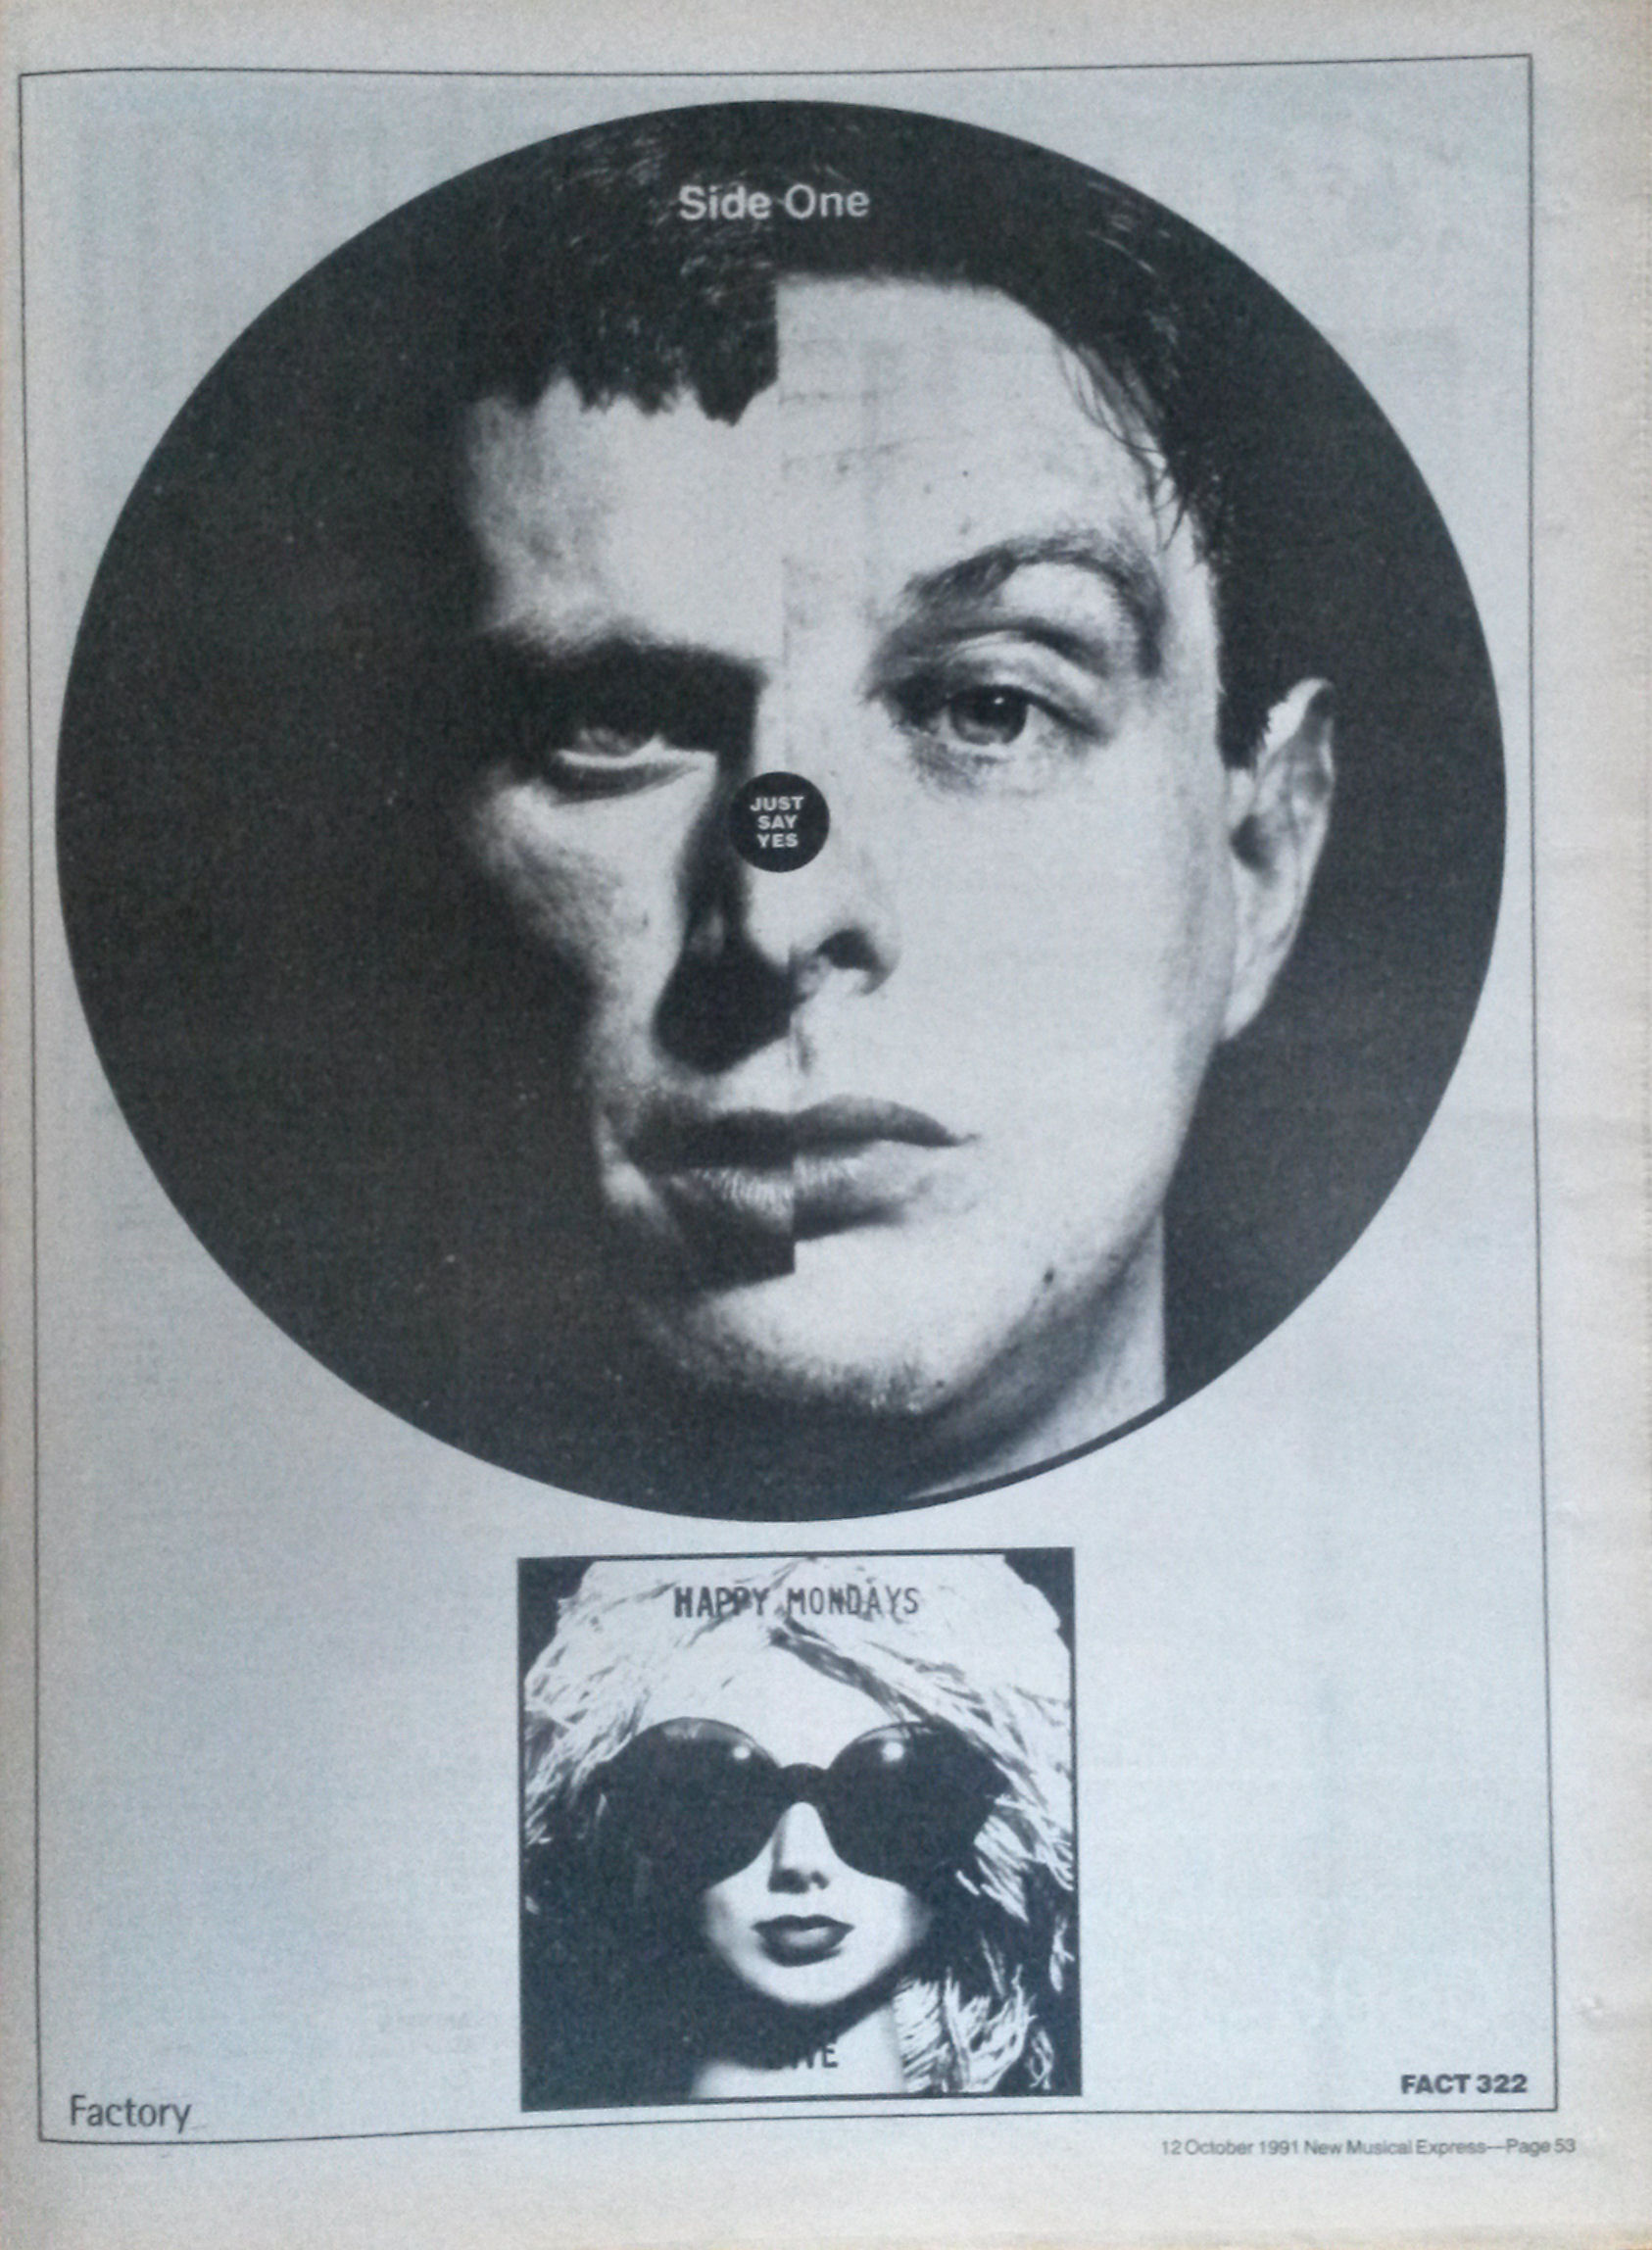 NME ad